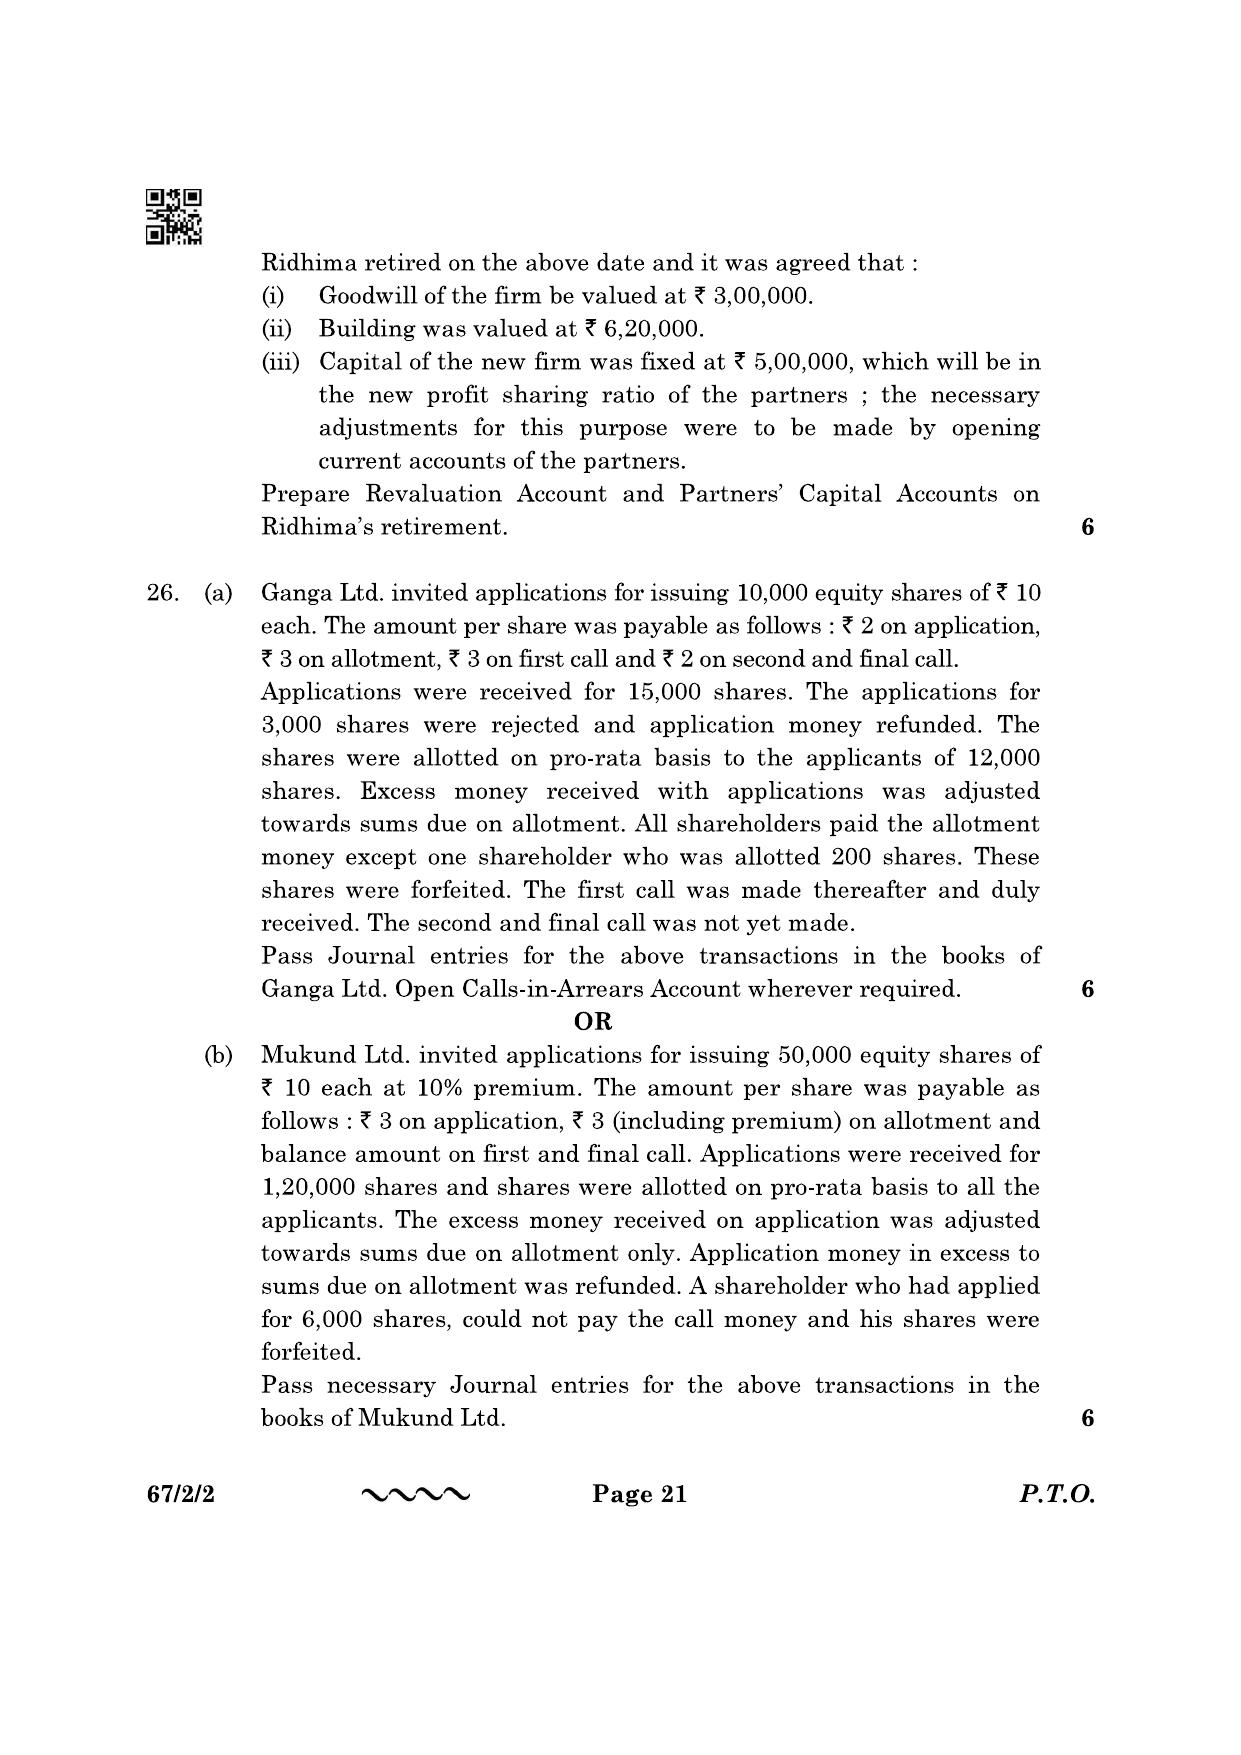 CBSE Class 12 67-2-2 Accountancy 2023 Question Paper - Page 21